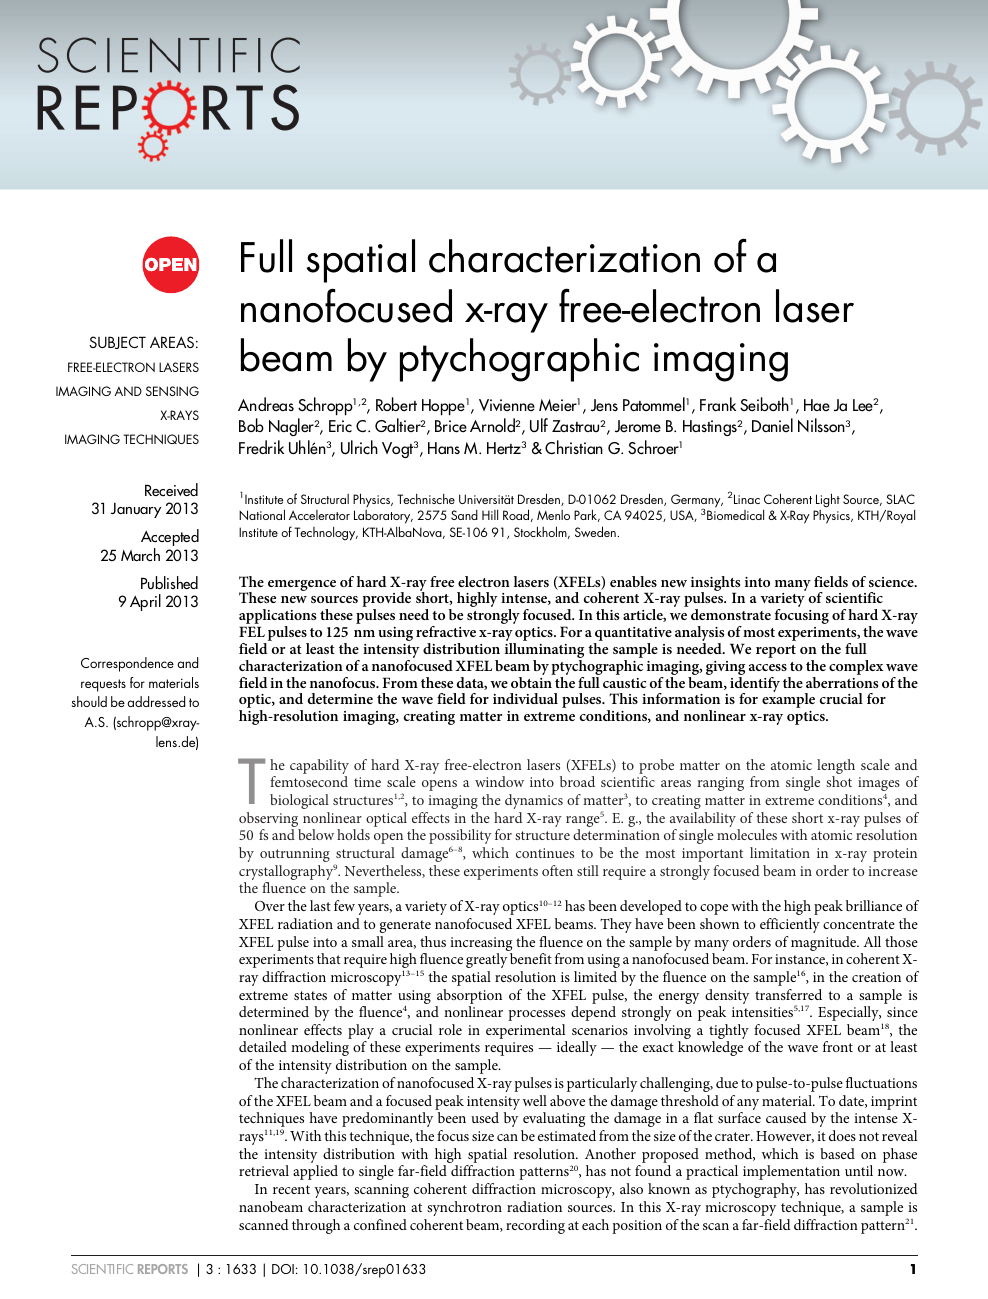 Full Spatial Characterization Of A Nanofocused X Ray Free Electron Laser Beam By Ptychographic Imaging Topic Of Research Paper In Nano Technology Download Scholarly Article Pdf And Read For Free On Cyberleninka Open Science